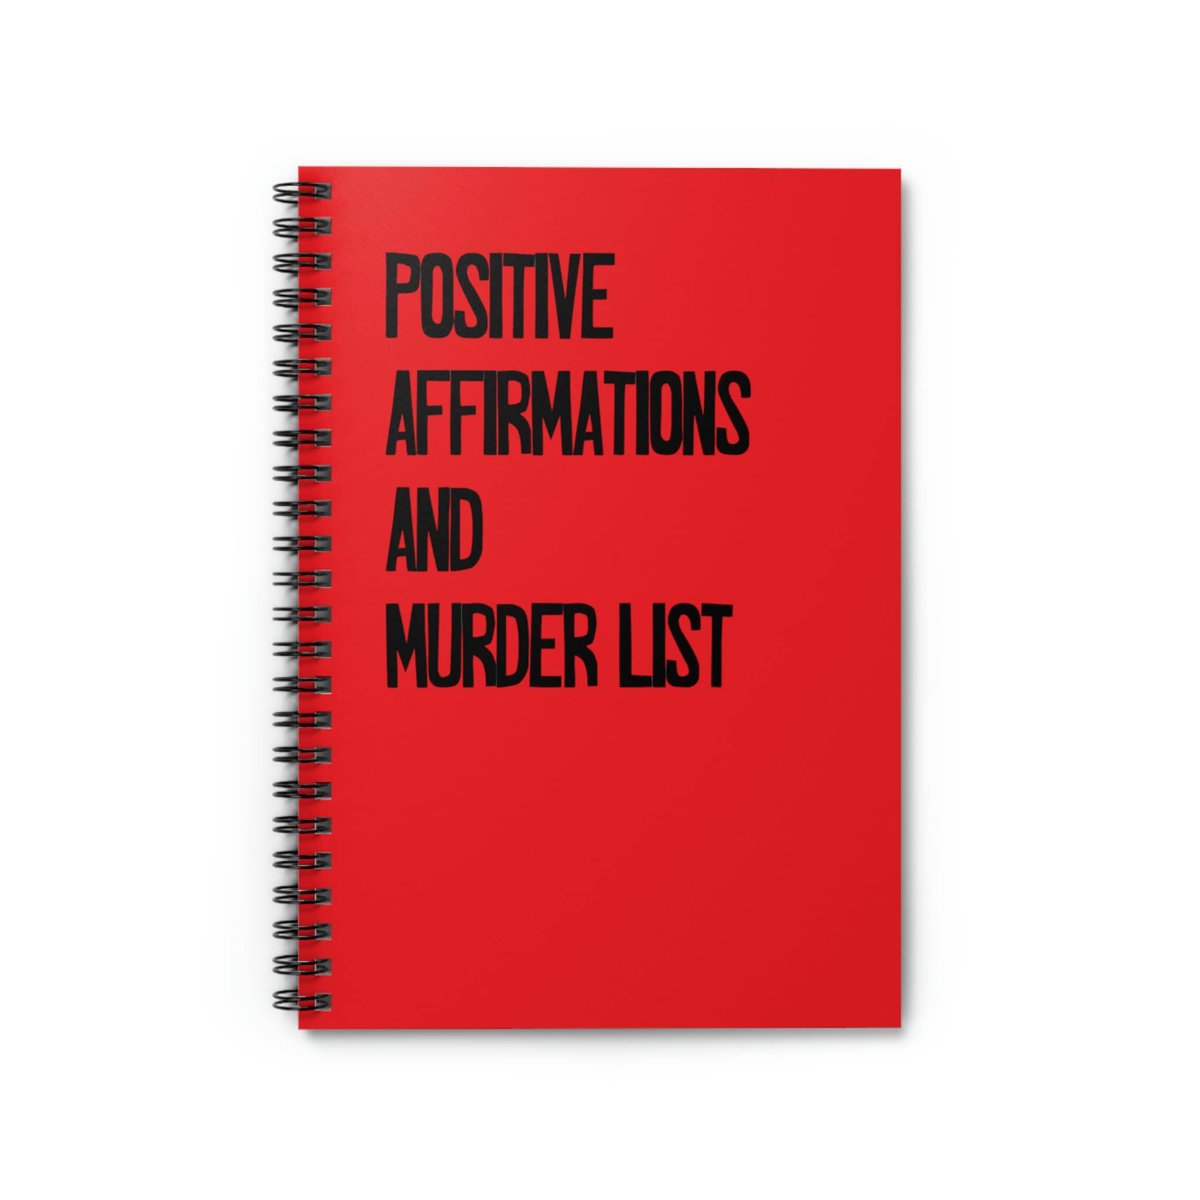 Excited to share this item from my #etsy shop: Spiral Notebook Line #funnynotebook #sarcasm #sarcastic #notebook #worknotebook #journal #funny #truecrime #murderinos #affirmations #giftforfriend #dateline #murdoch #murdermystery etsy.me/3K1wXYQ